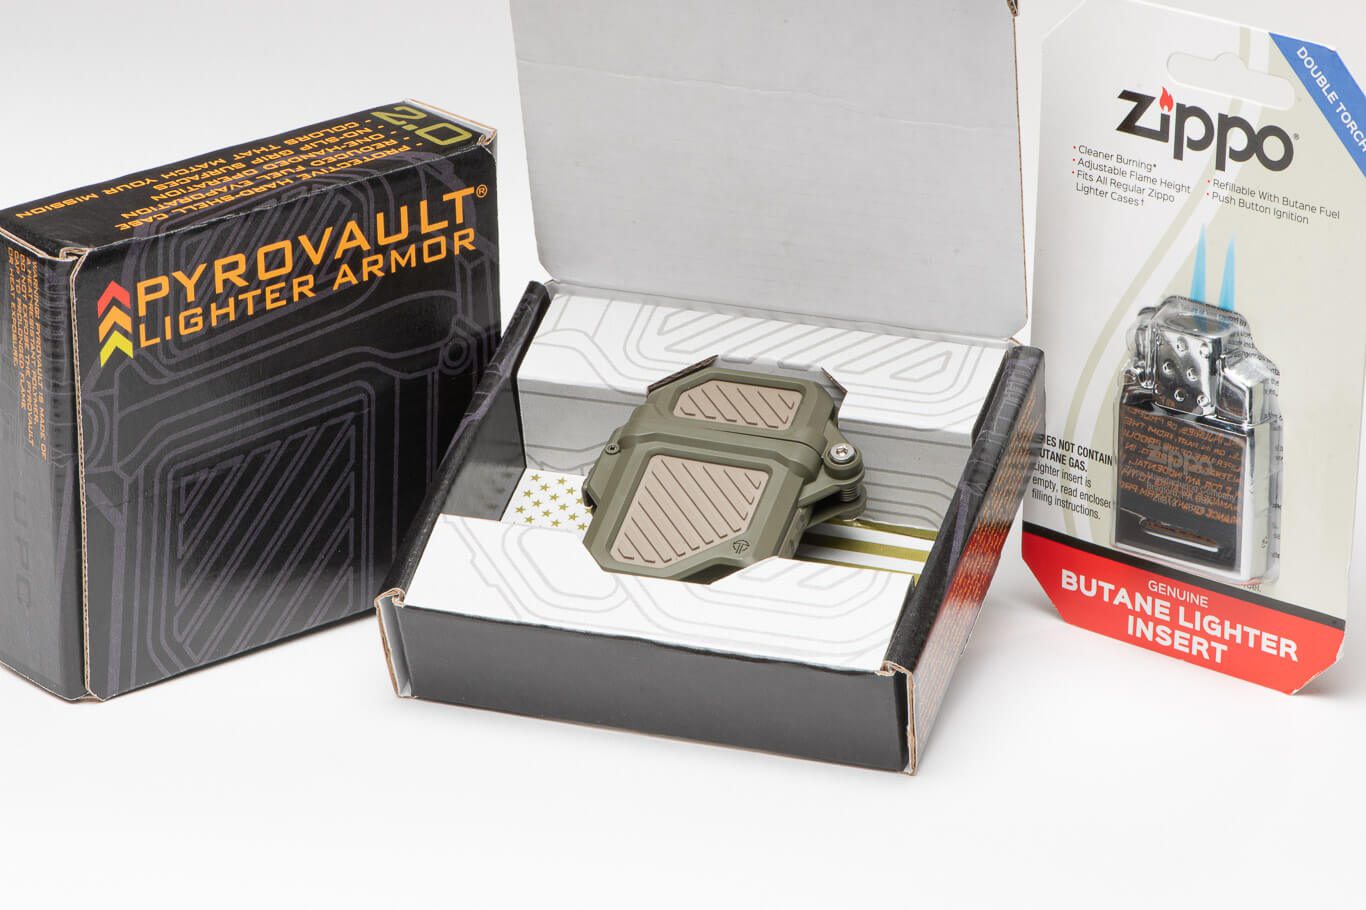 Packaging of PyroVault 2.0 Lighter Armor with PyroVault 2.0 and Zippo Double Torch Butane Lighter Insert